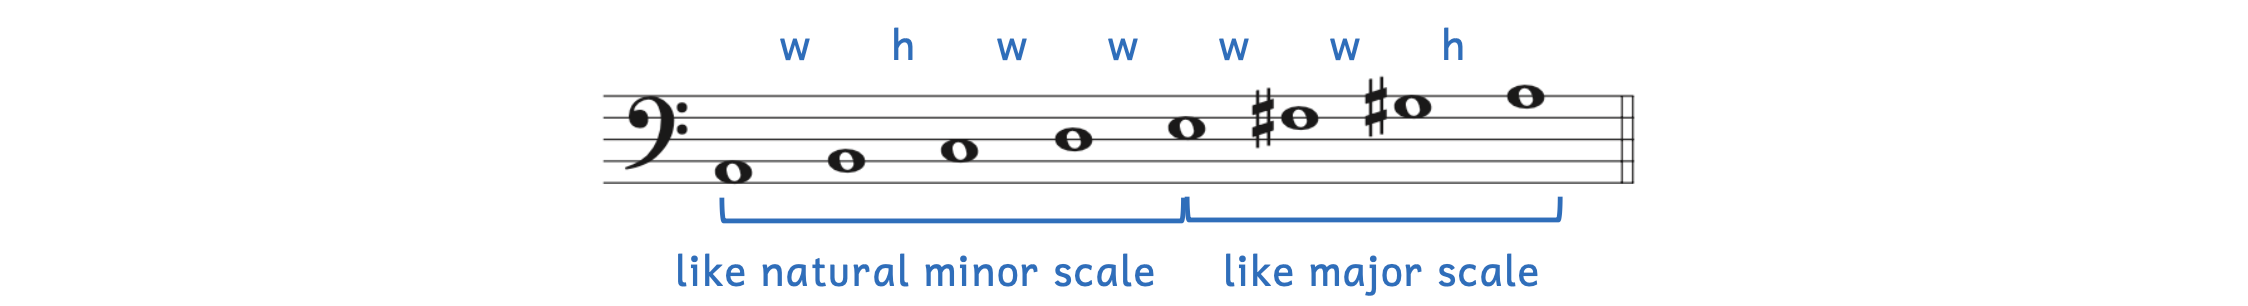 The melodic minor scale's first five notes are the same as the natural minor scale, while the last four notes are the same as the major scale.